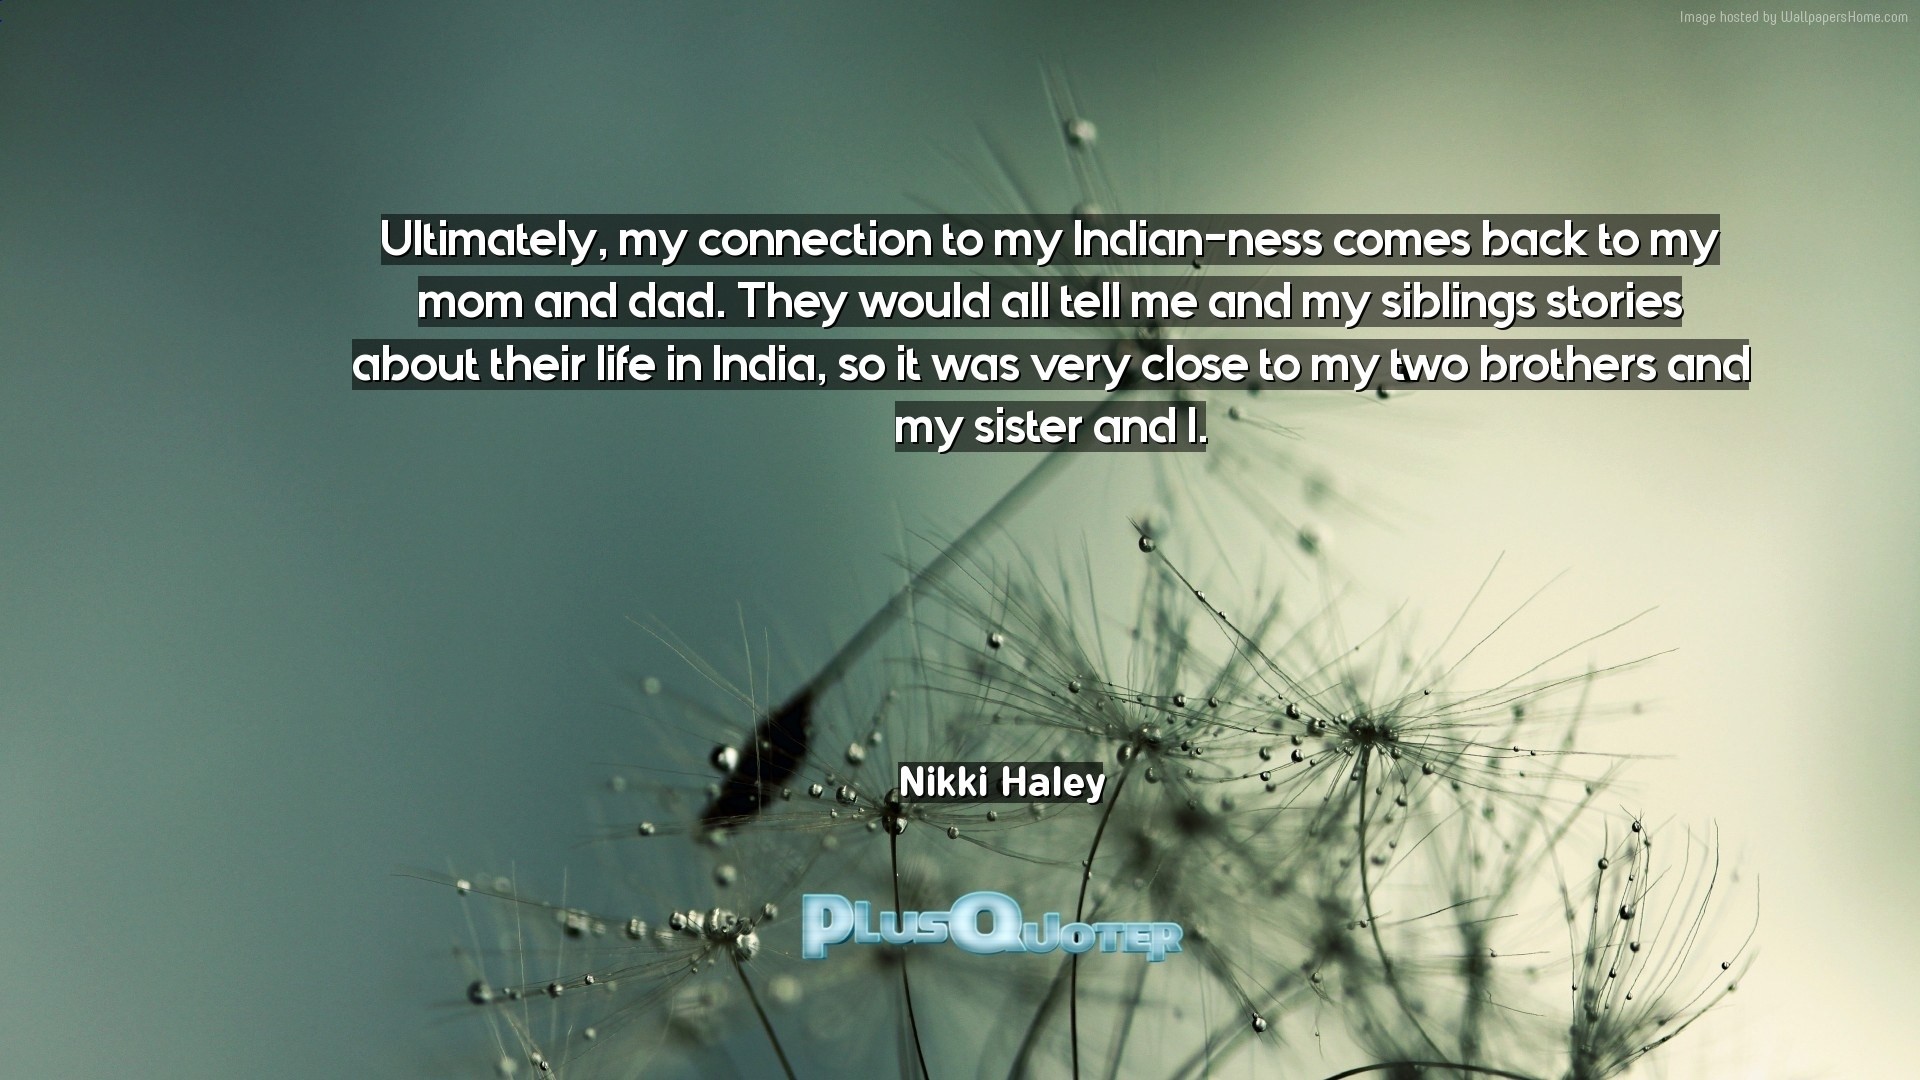 1920x1080 Download Wallpaper with inspirational Quotes- "Ultimately, my connection to  my Indian-ness